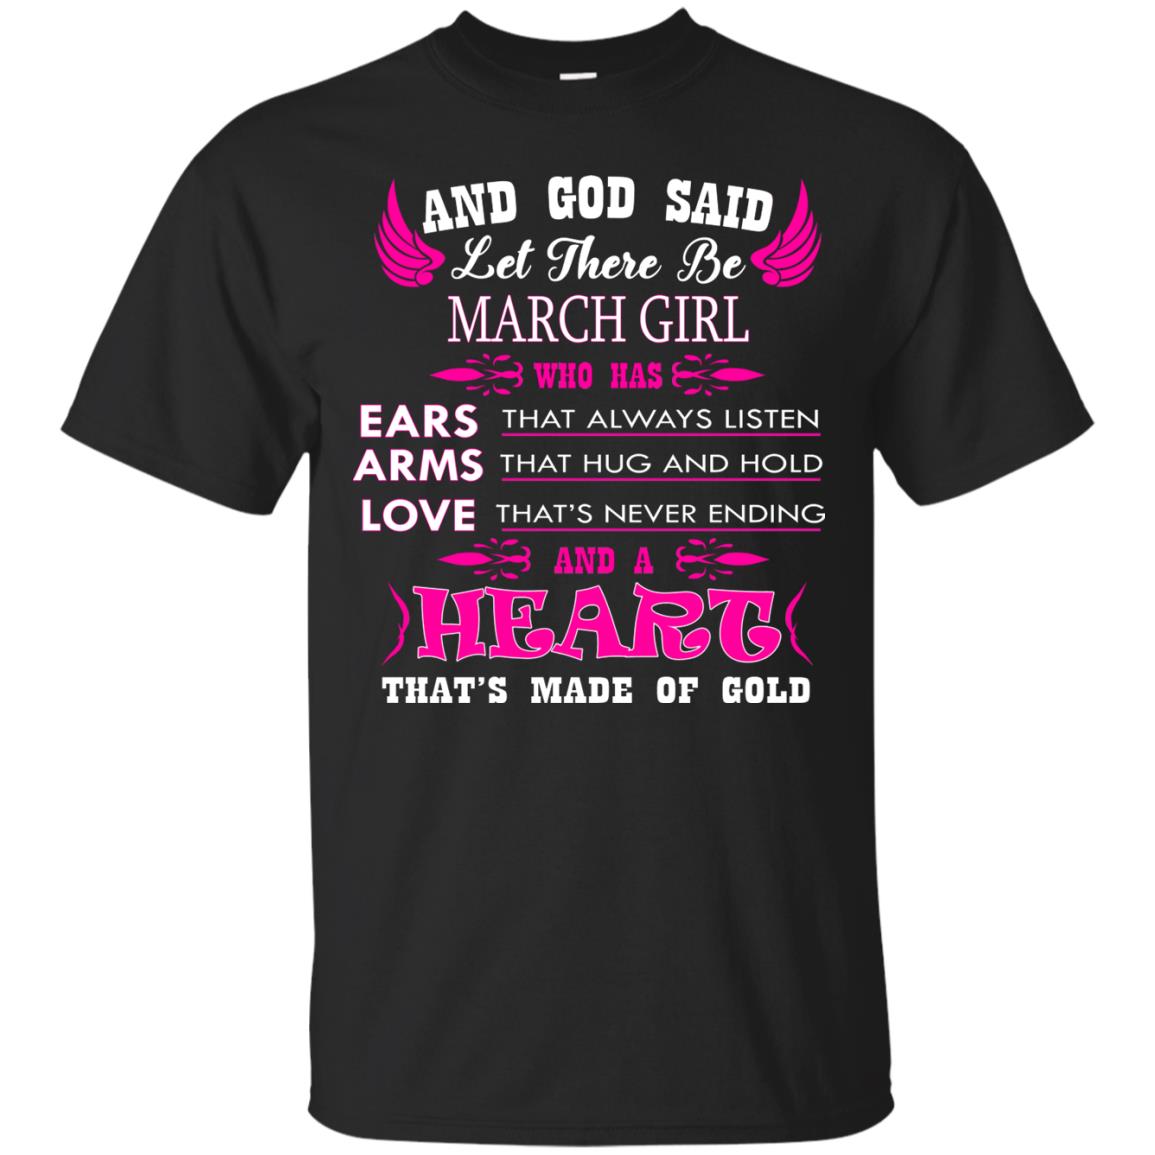 And God Said Let There Be March Girl Who Has Ears - Arms - Love Shirt